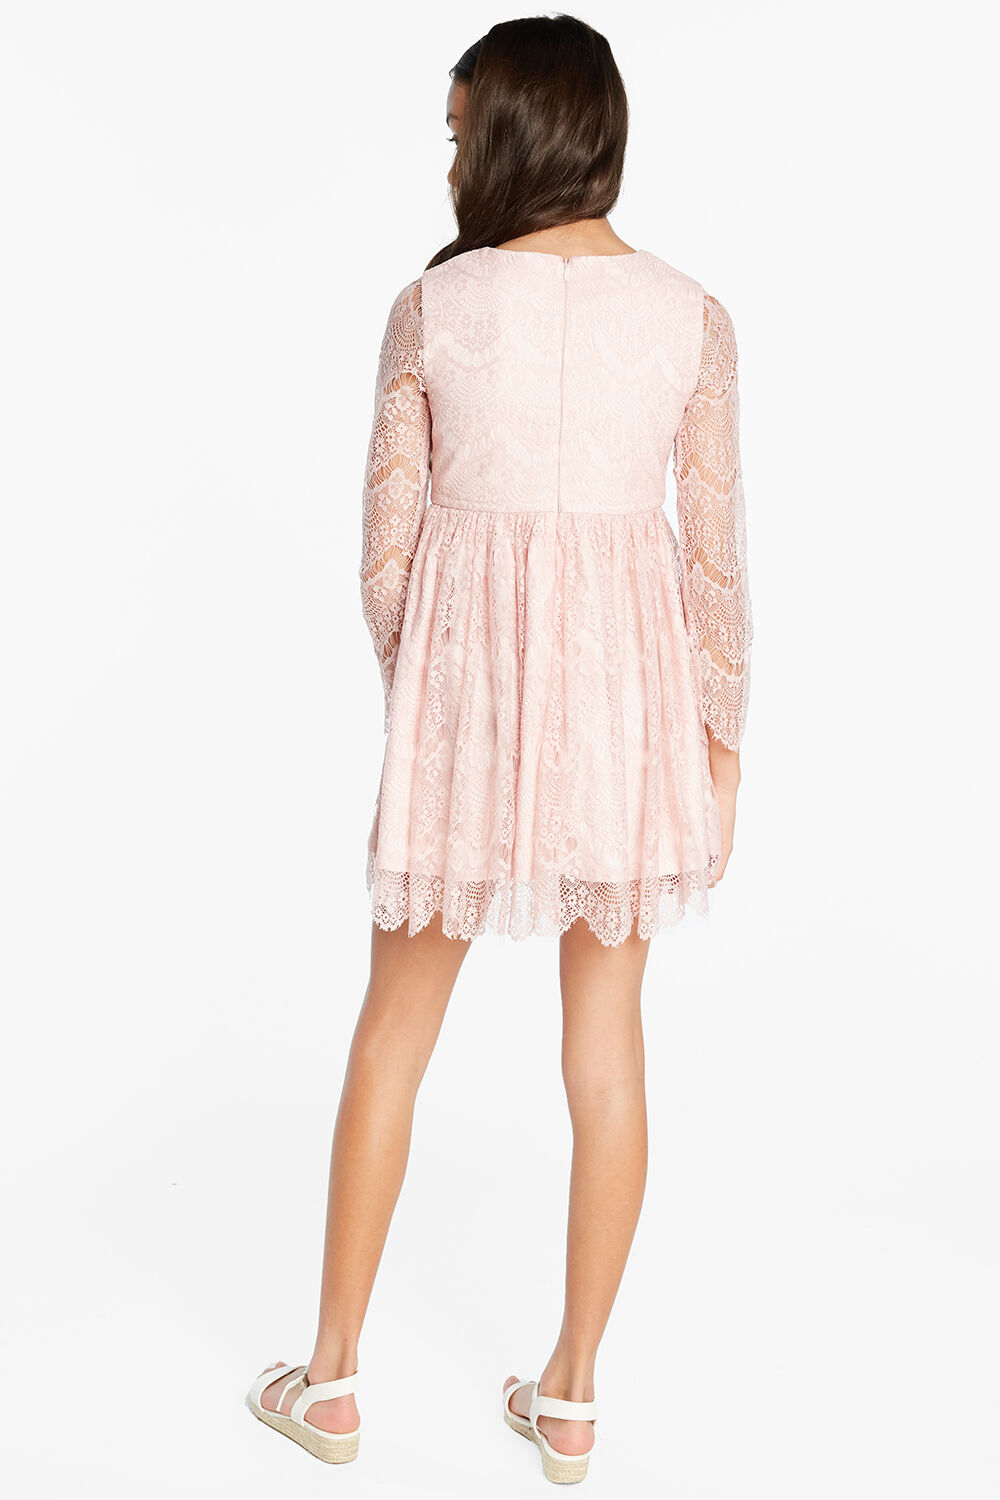 TWEEN GIRL GERTRUDE LACE DRESS in colour TUSCANY